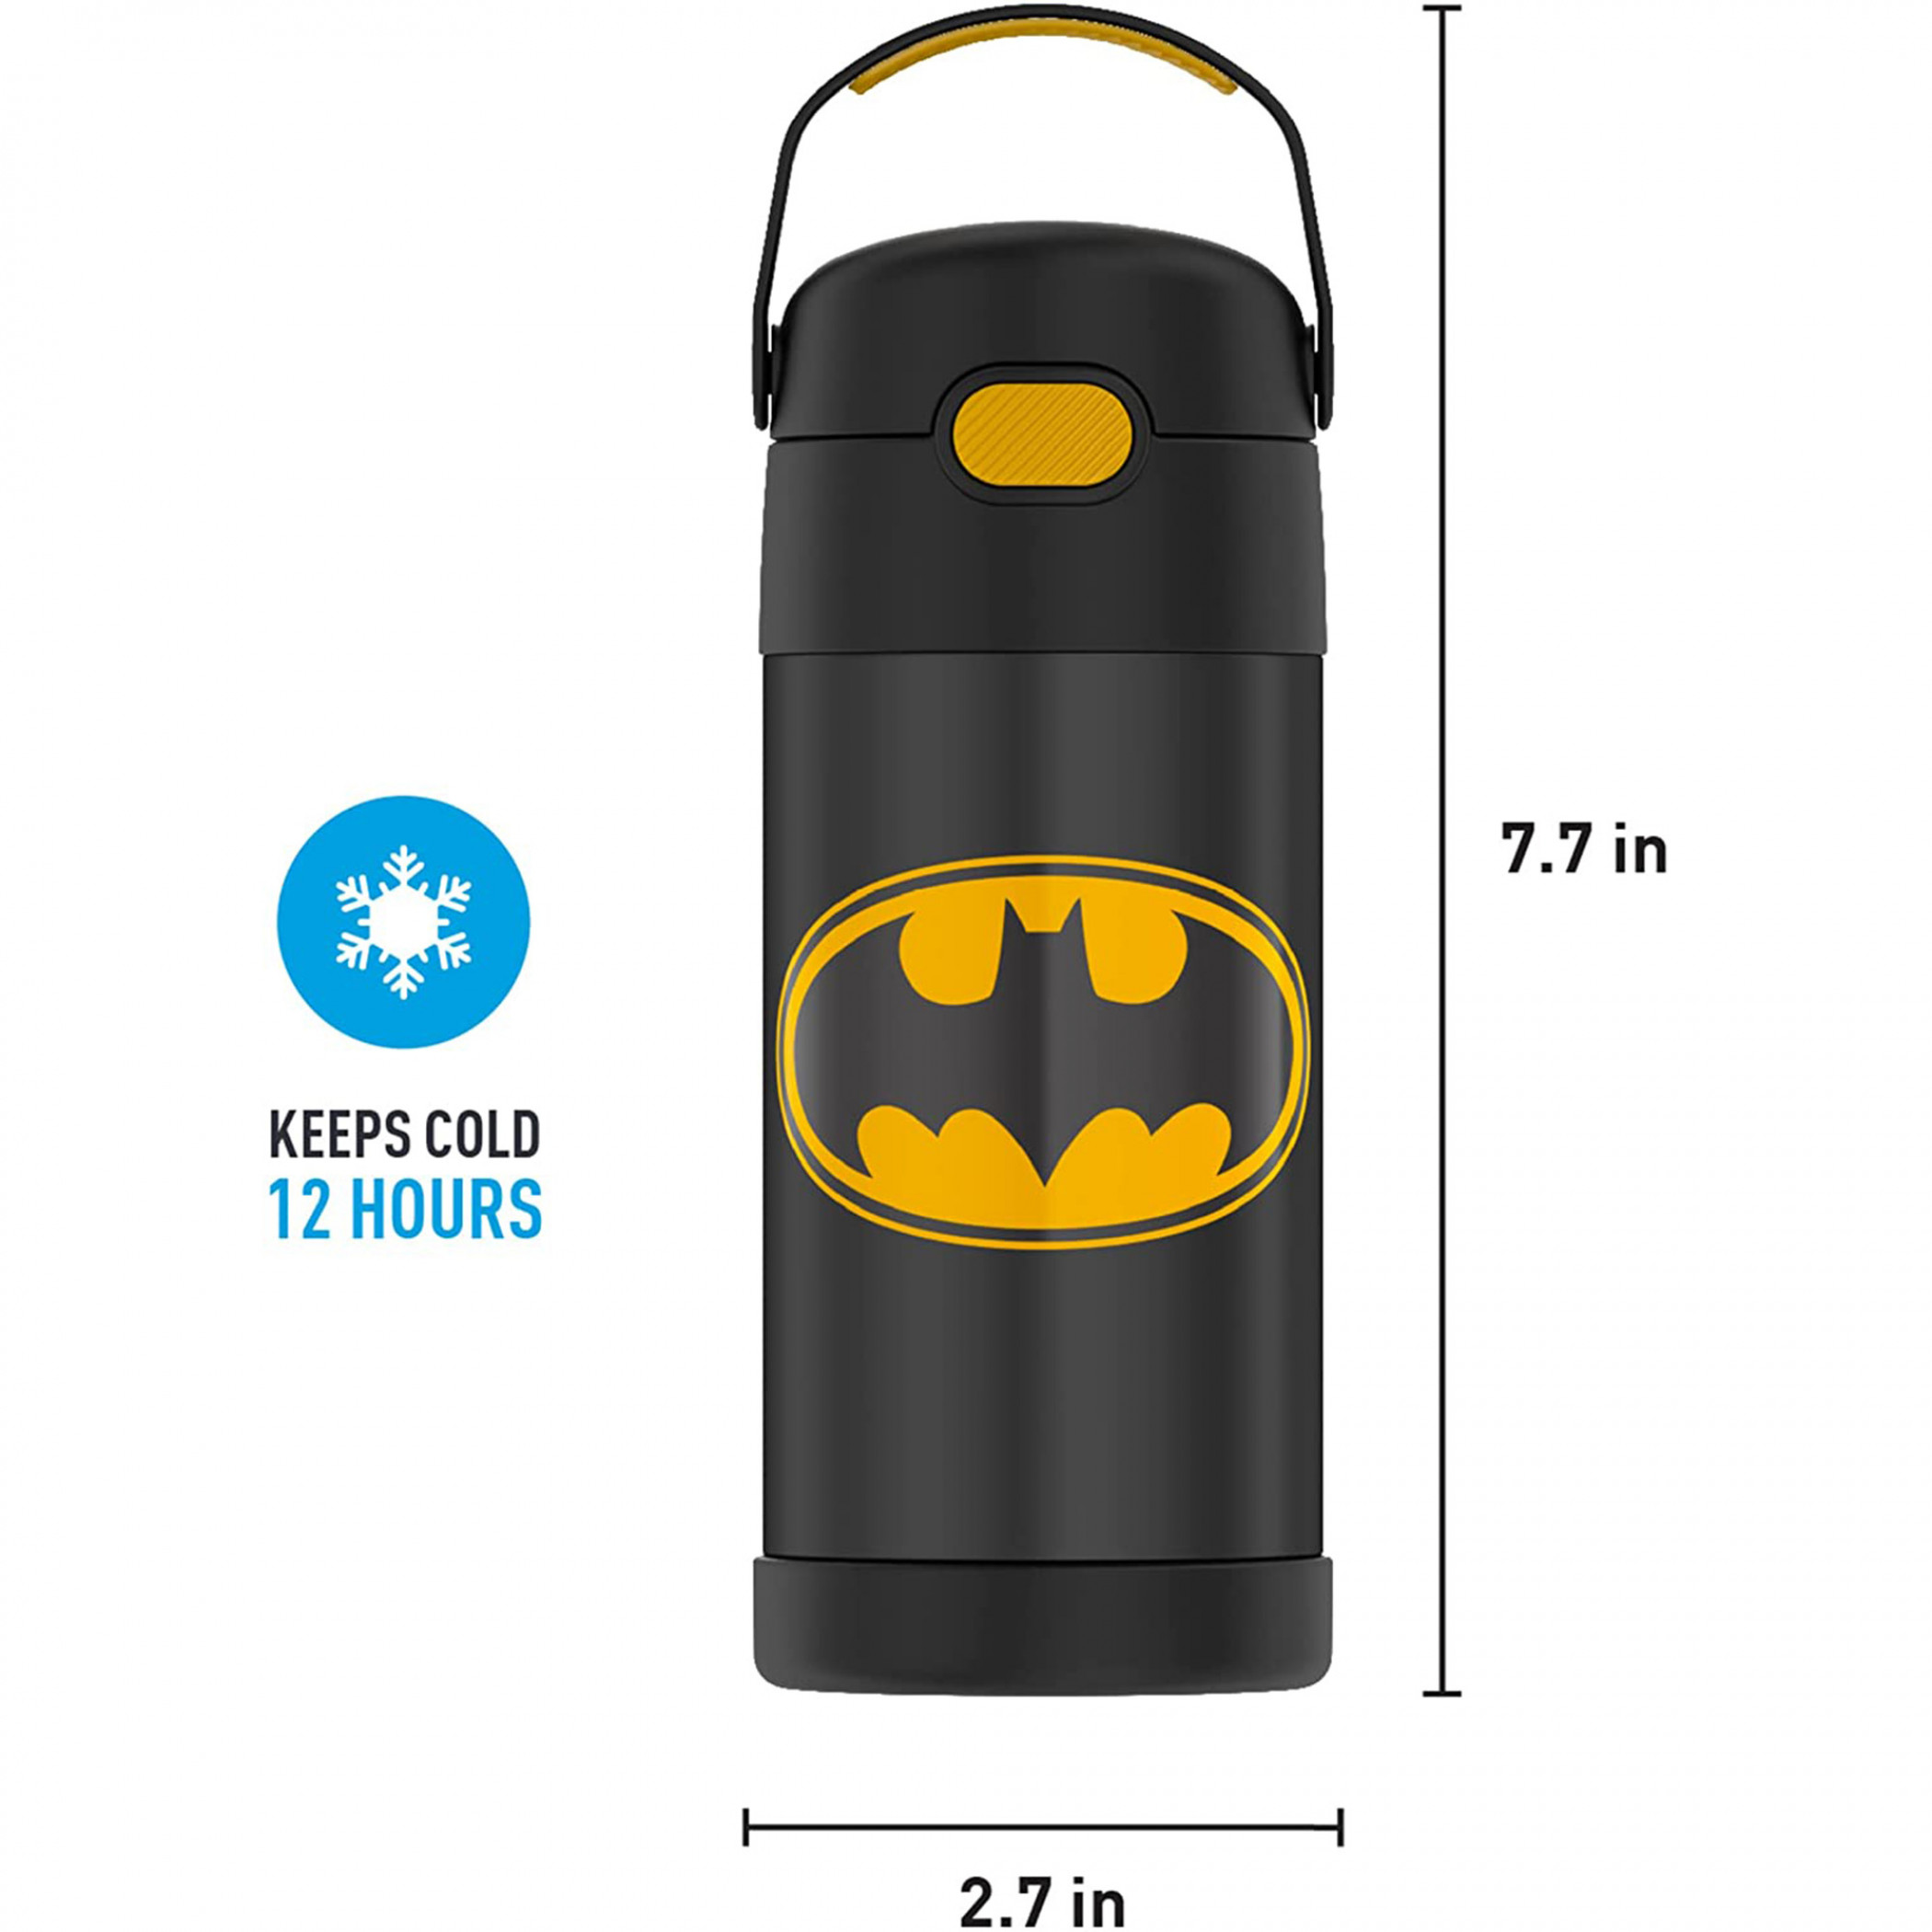 DC Comics Batman Symbol Stainless Steel 12oz Thermos Funtainer